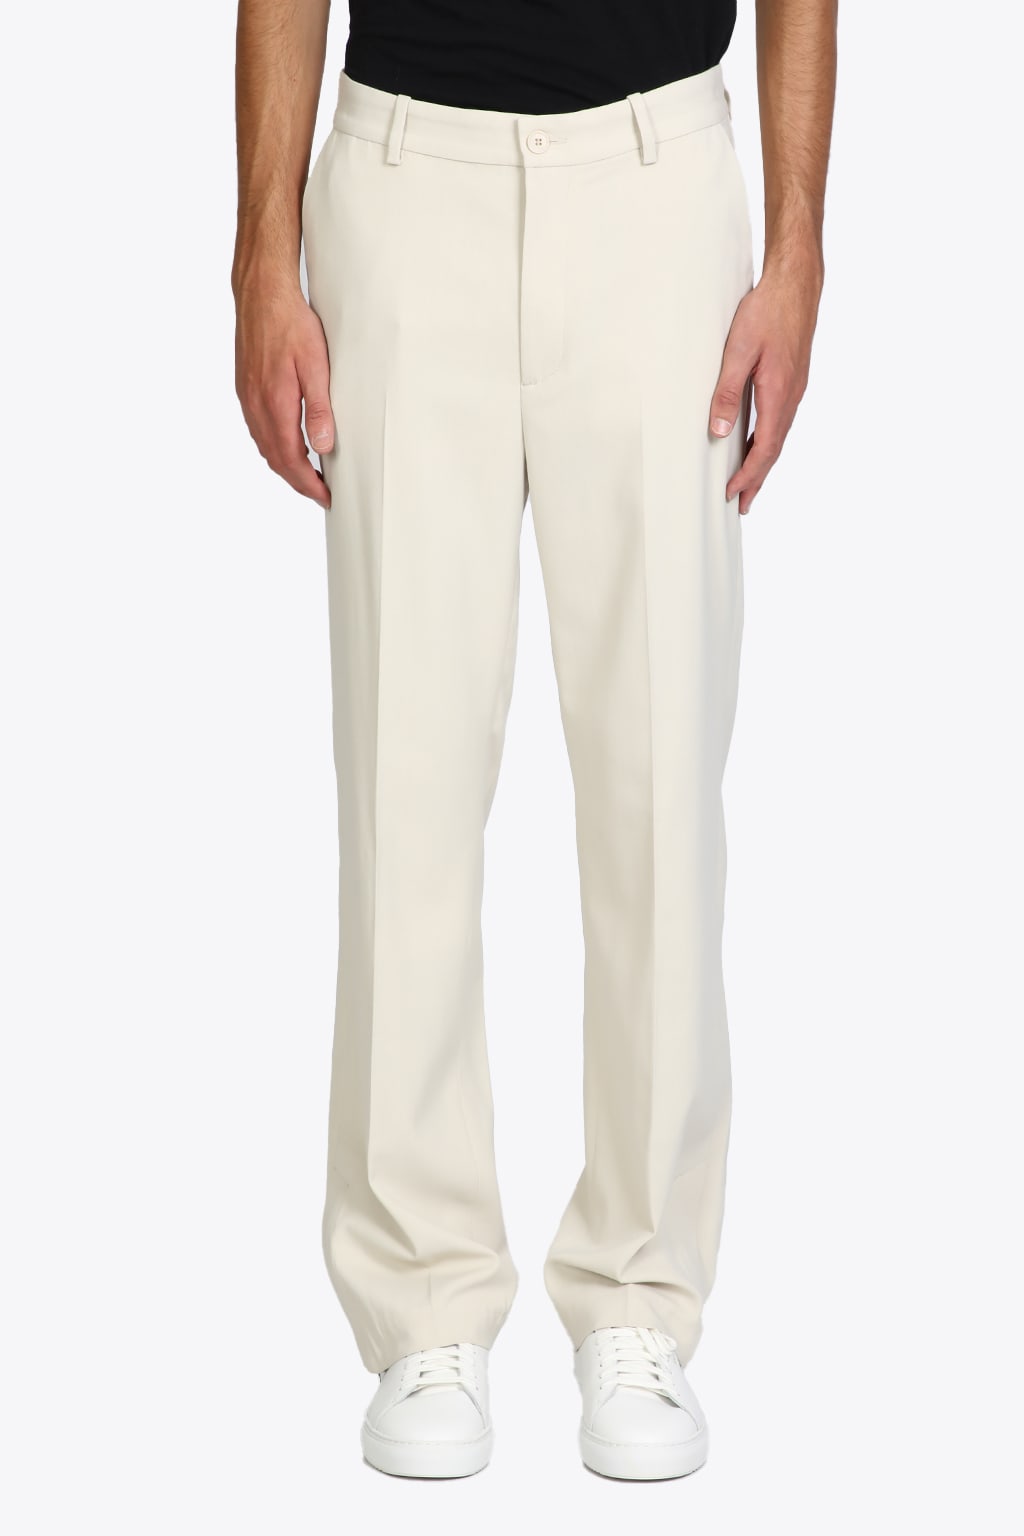 Axel Arigato Grade Trousers Cream viscose tailored pant with ankle vent - Grade trousers